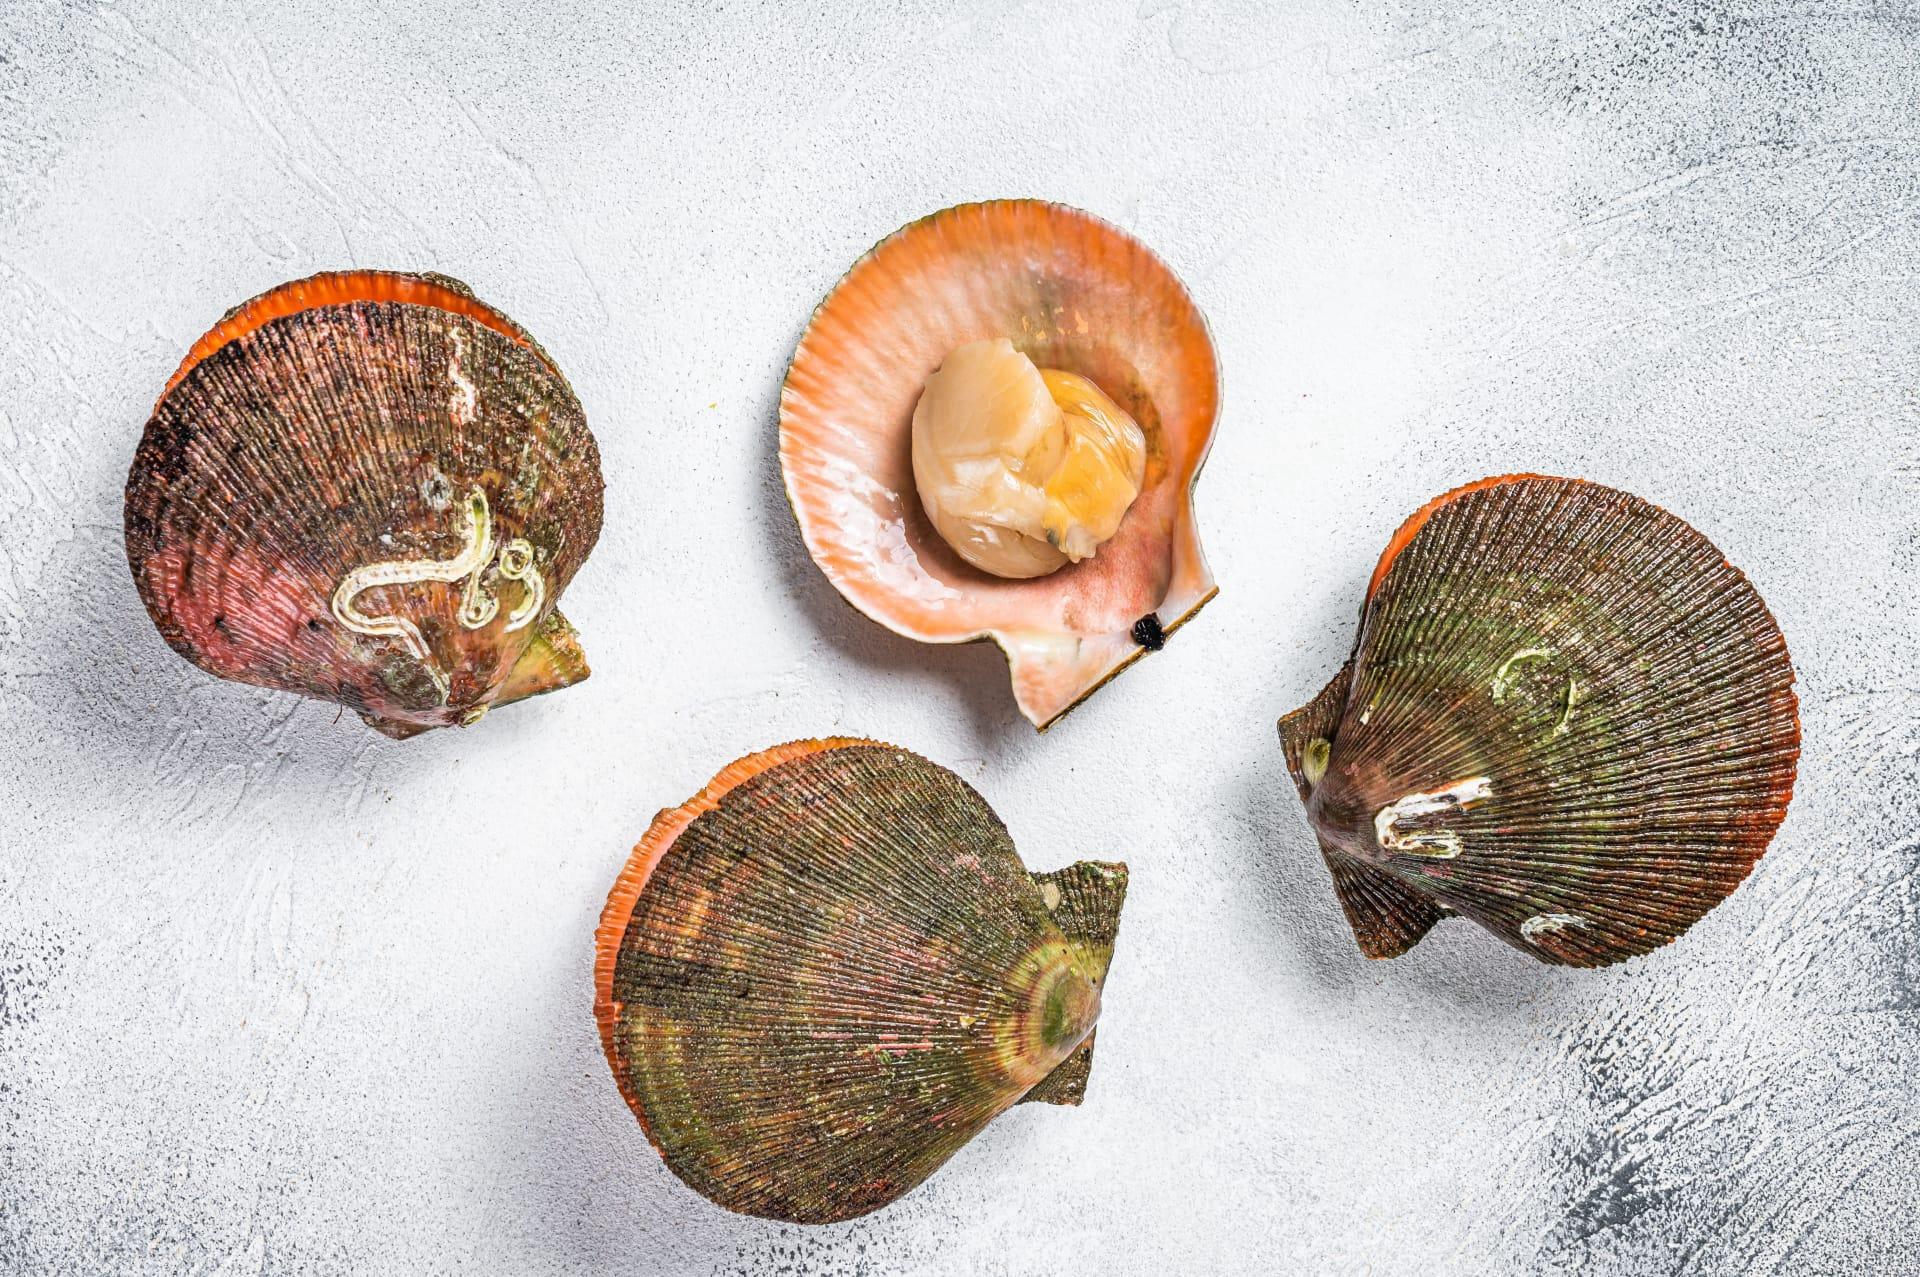 Scallop pictures